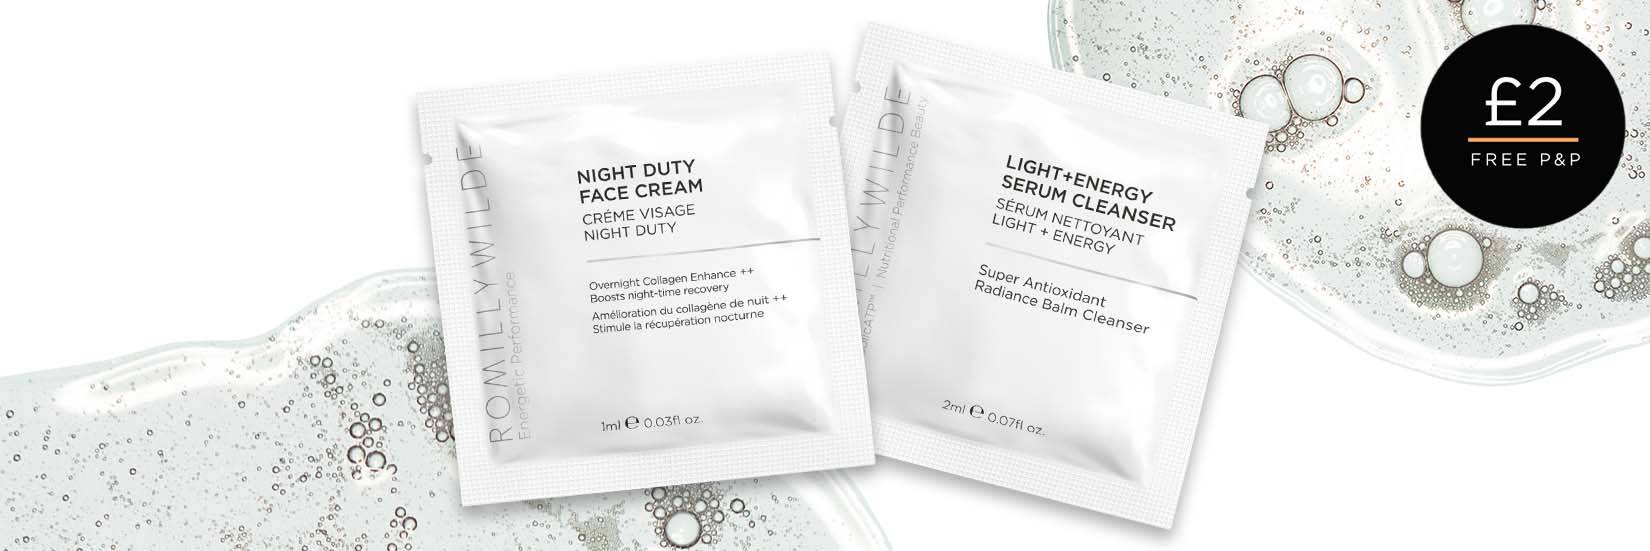 Night Duty Face Cream Claims Banner